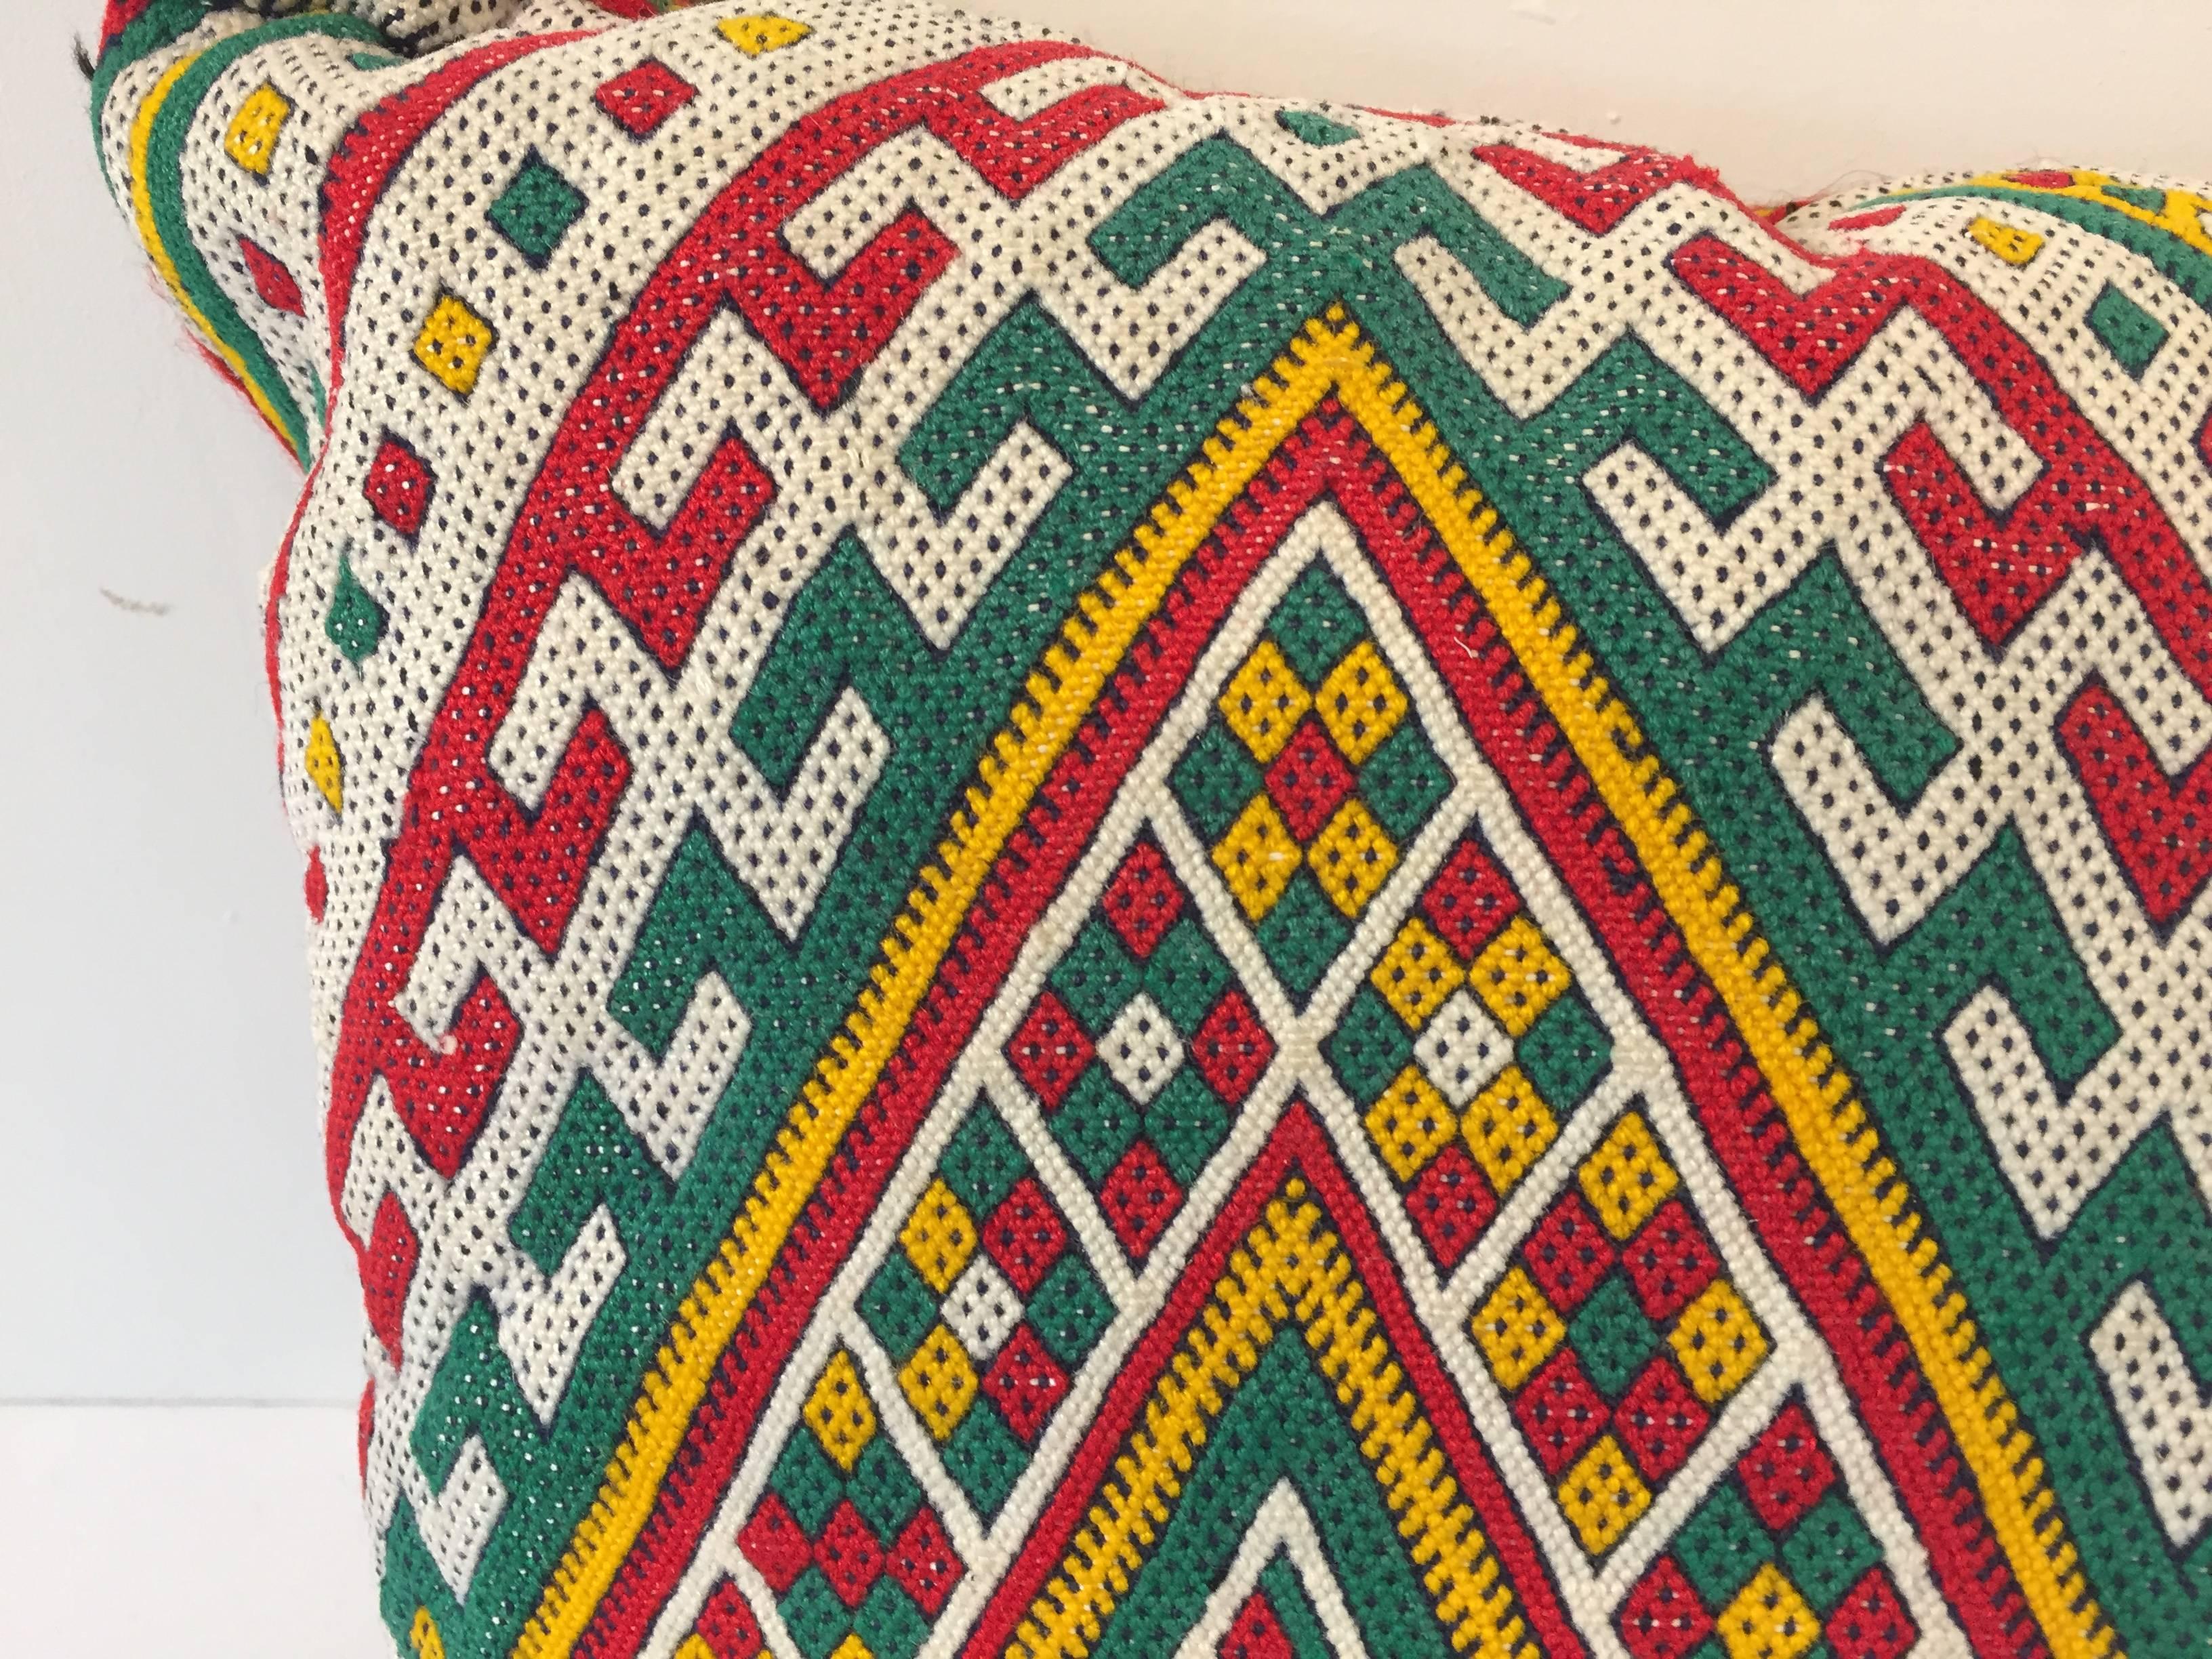 Moroccan Berber handwoven tribal throw pillow made from a vintage flat-weave rug.
The front and the back are made from a different rug, front is more elaborate and back is more plain.
Geometric African tribal designs in red, white and black and